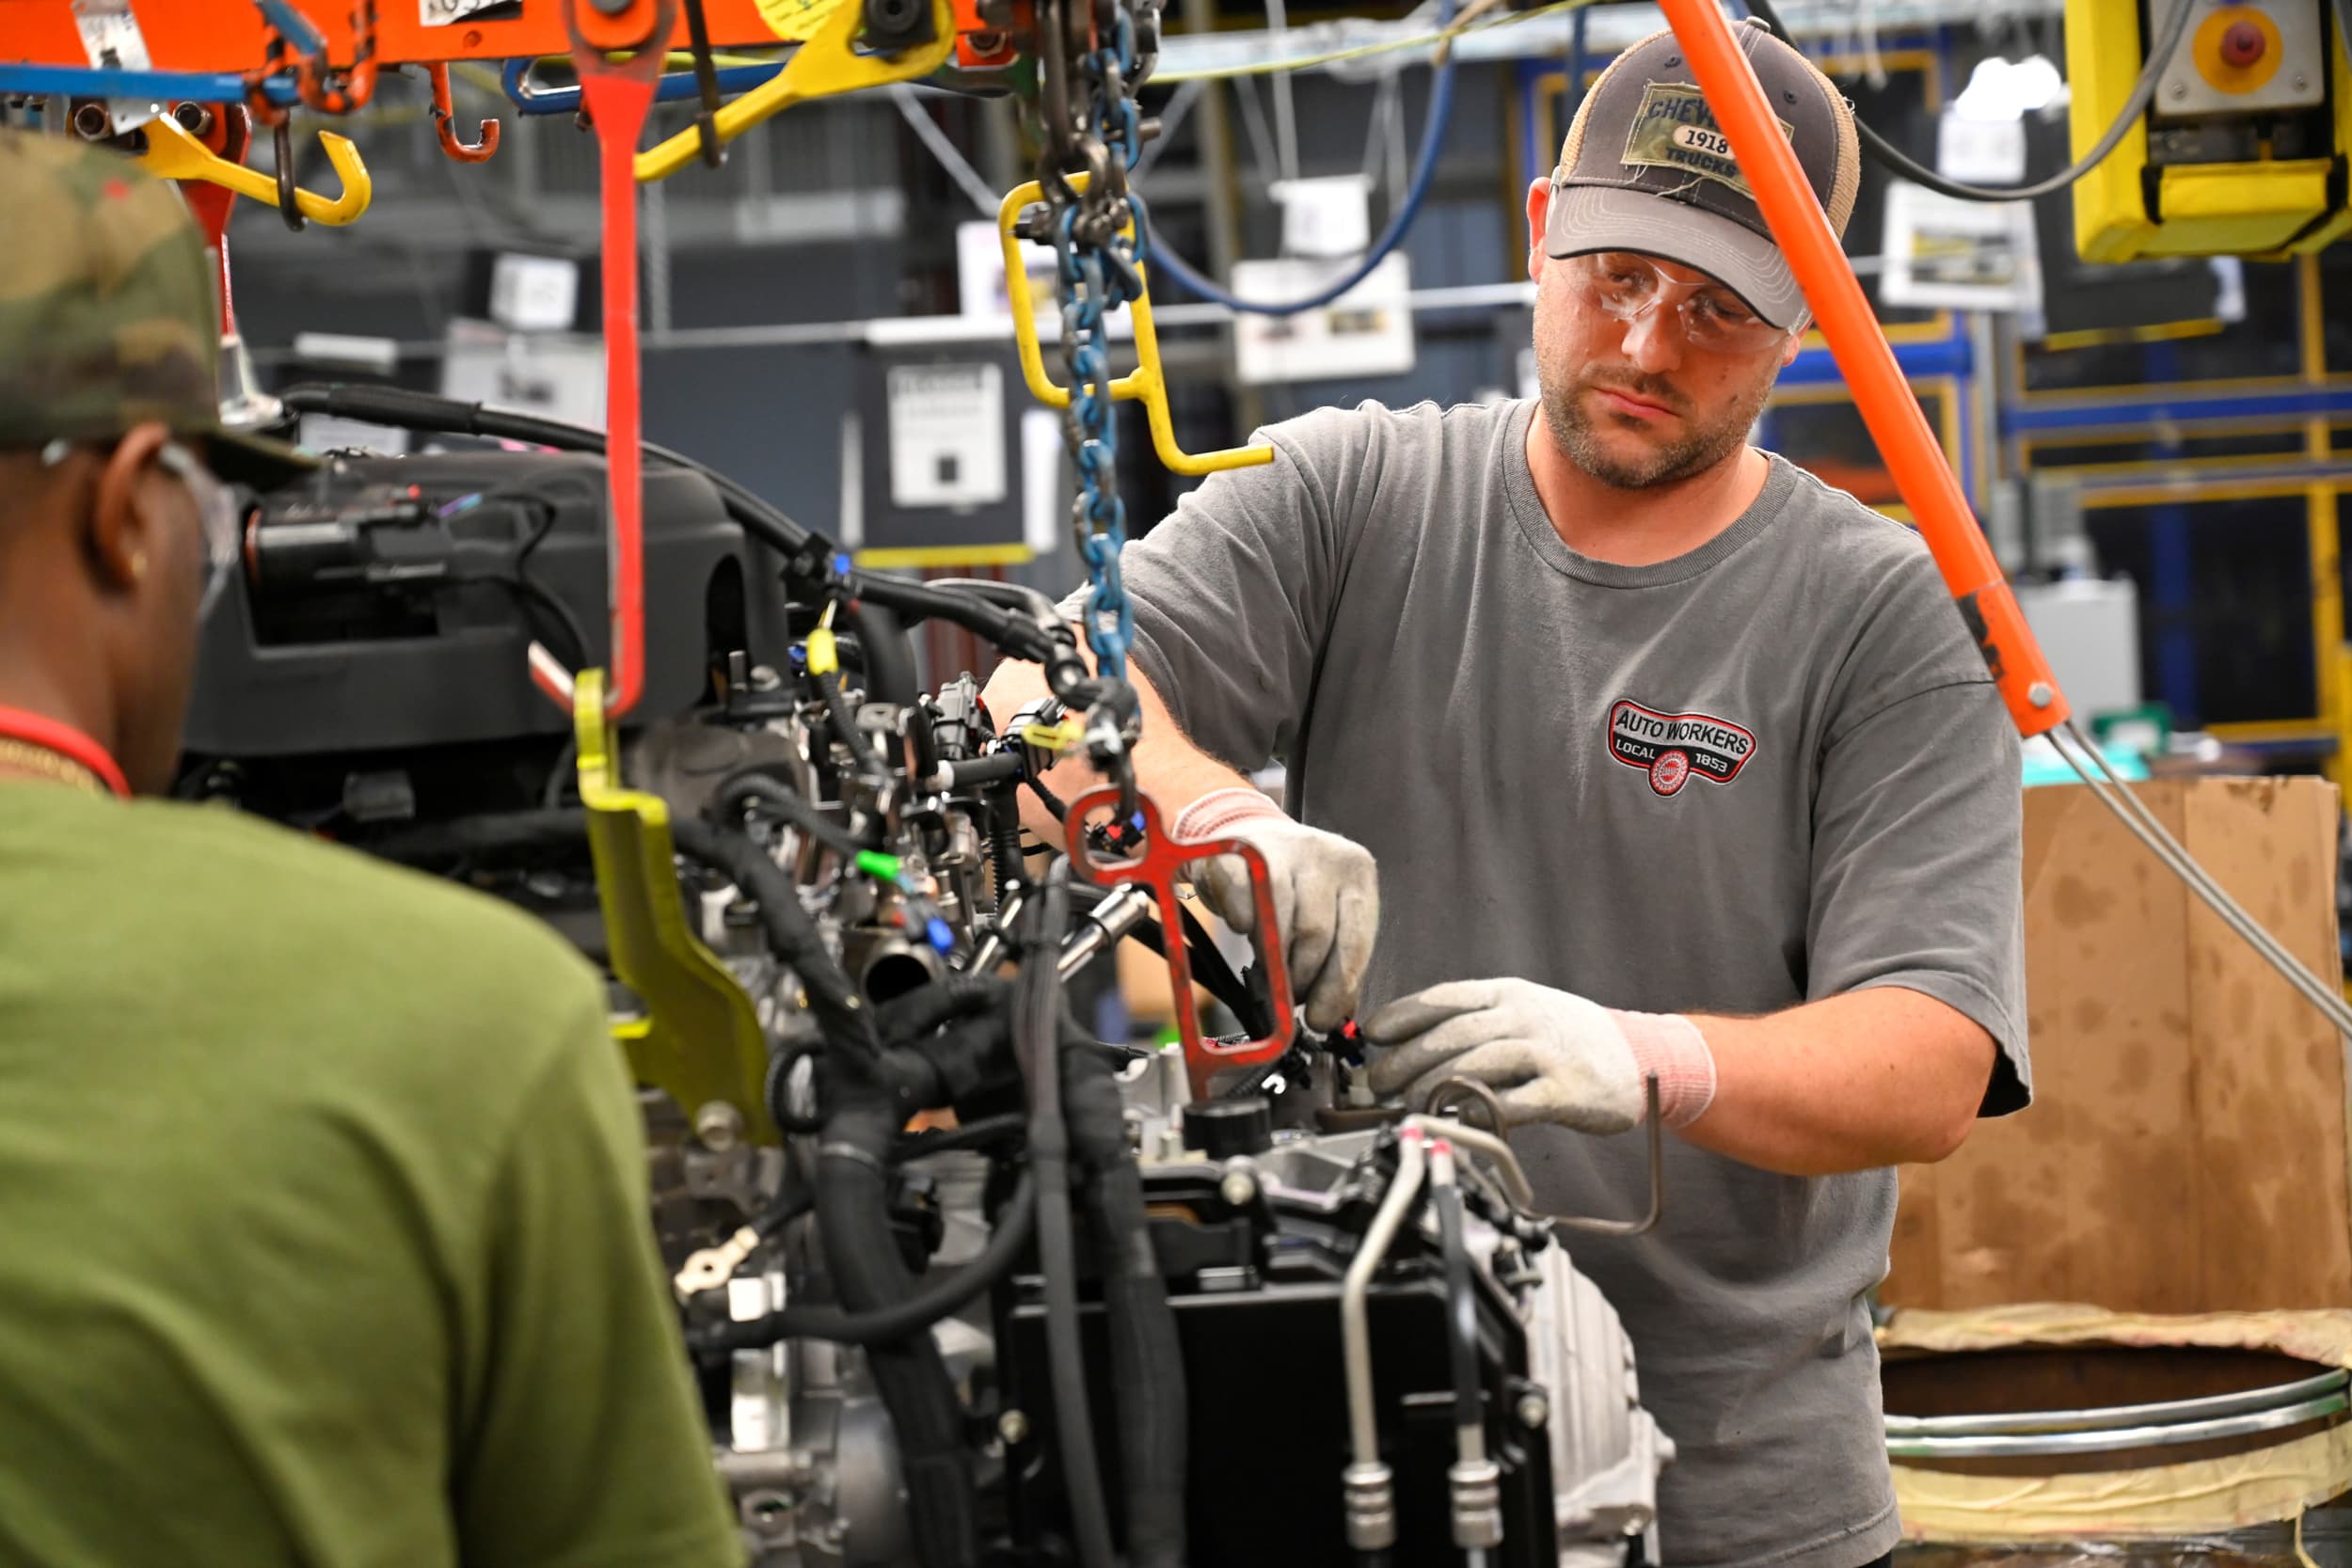 GM cutting production at various plants due to chip shortage